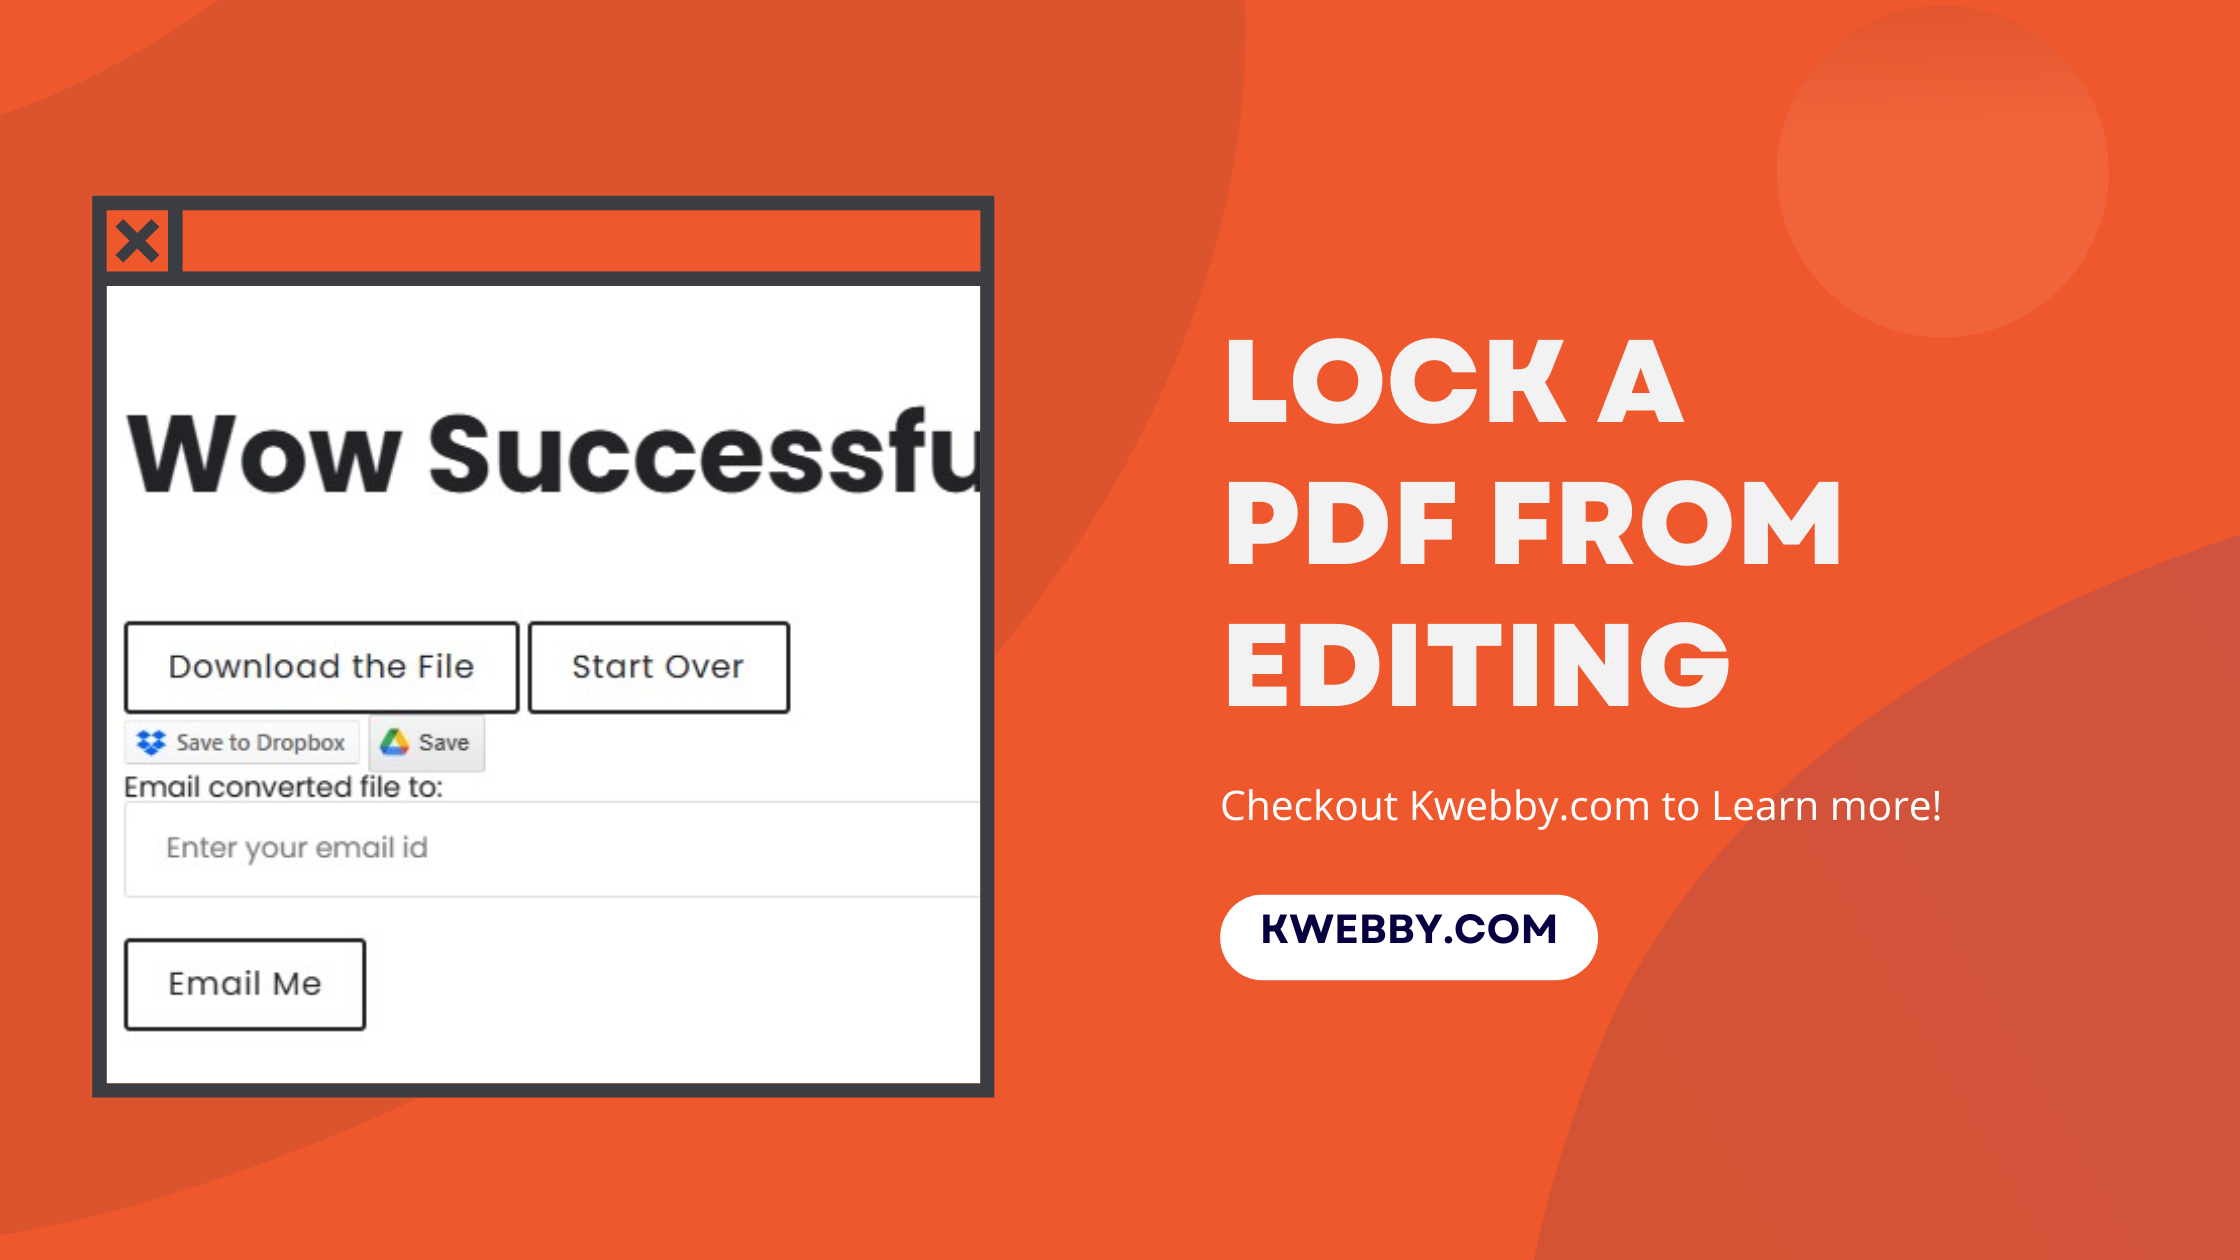 How to lock a PDF from editing